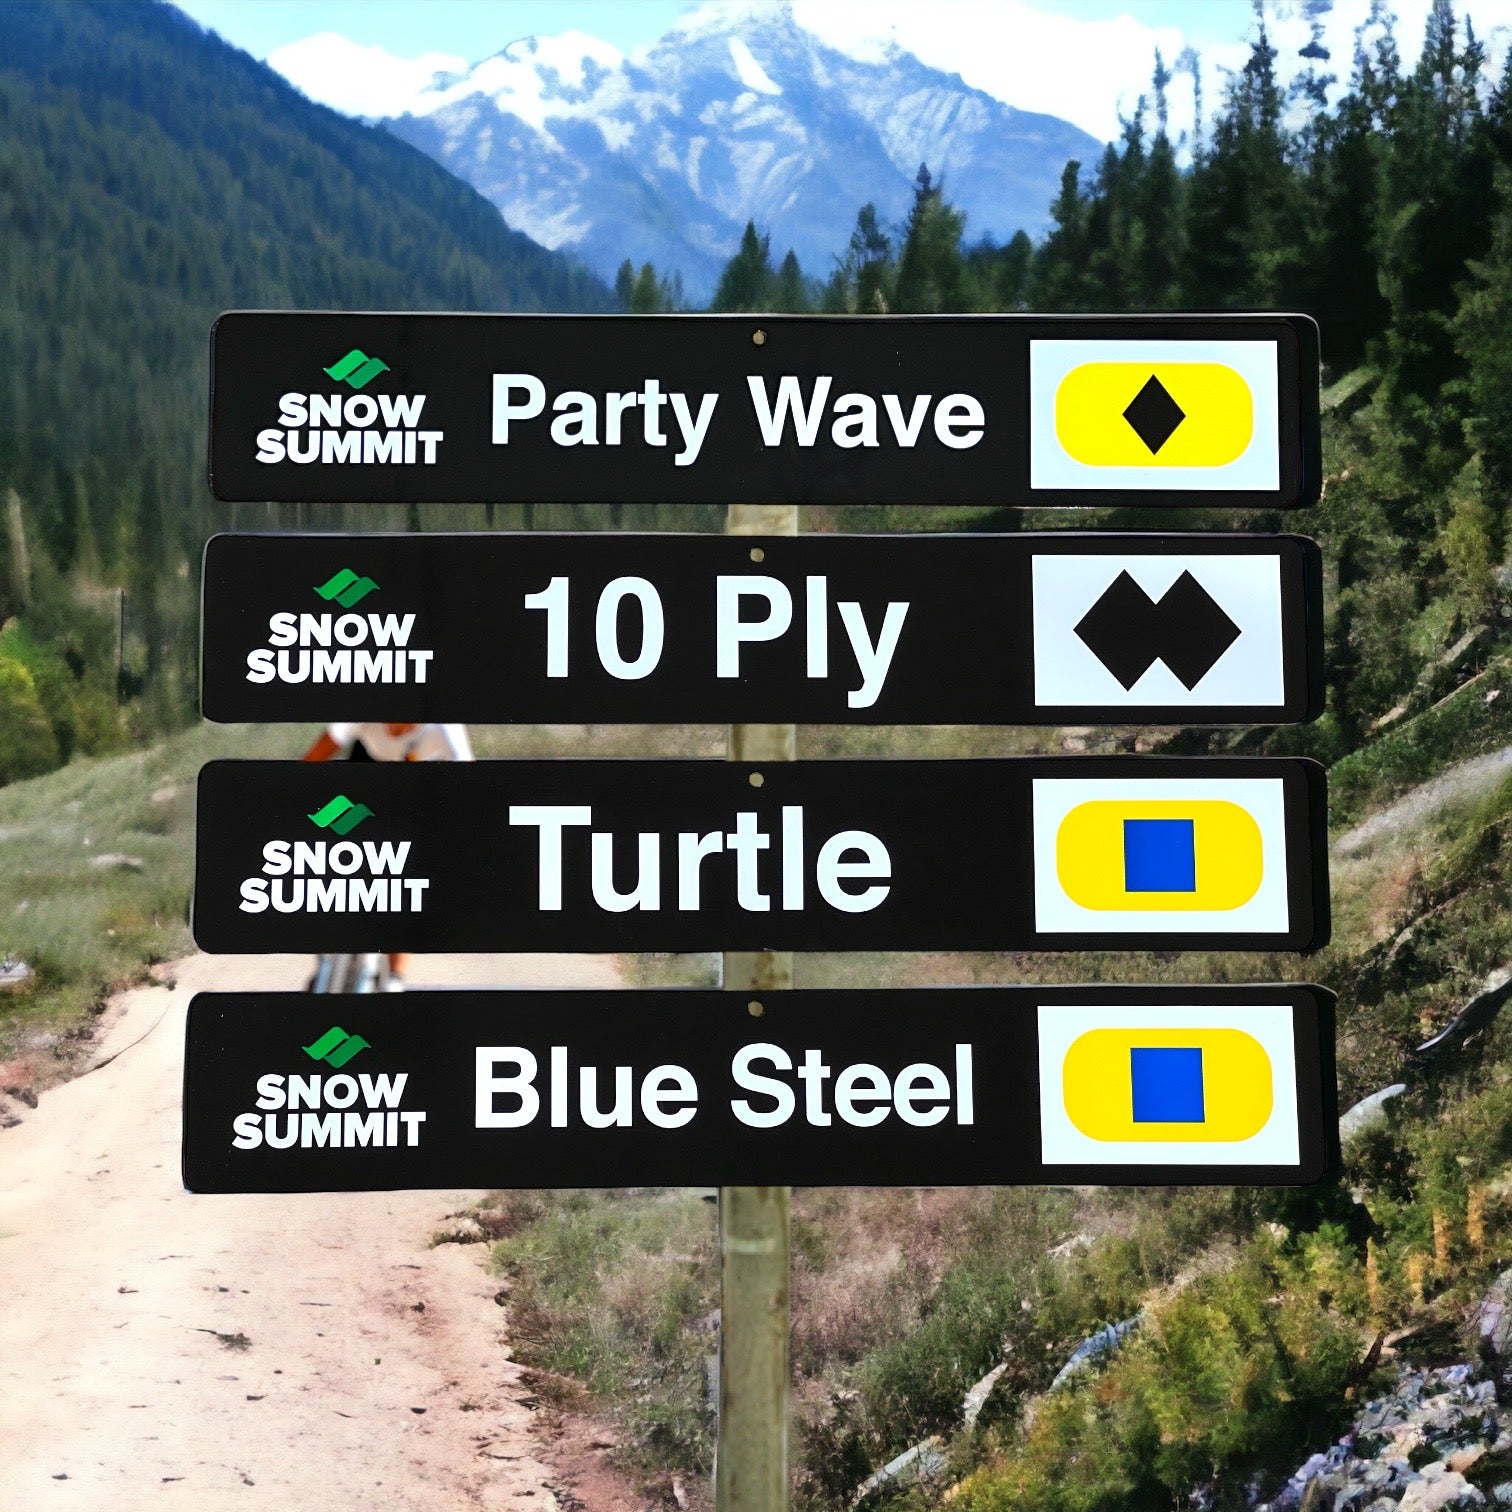 Black trail signs with Snow Summit runs: Party Wave, 10 Ply, Turtle, and Blue Steel